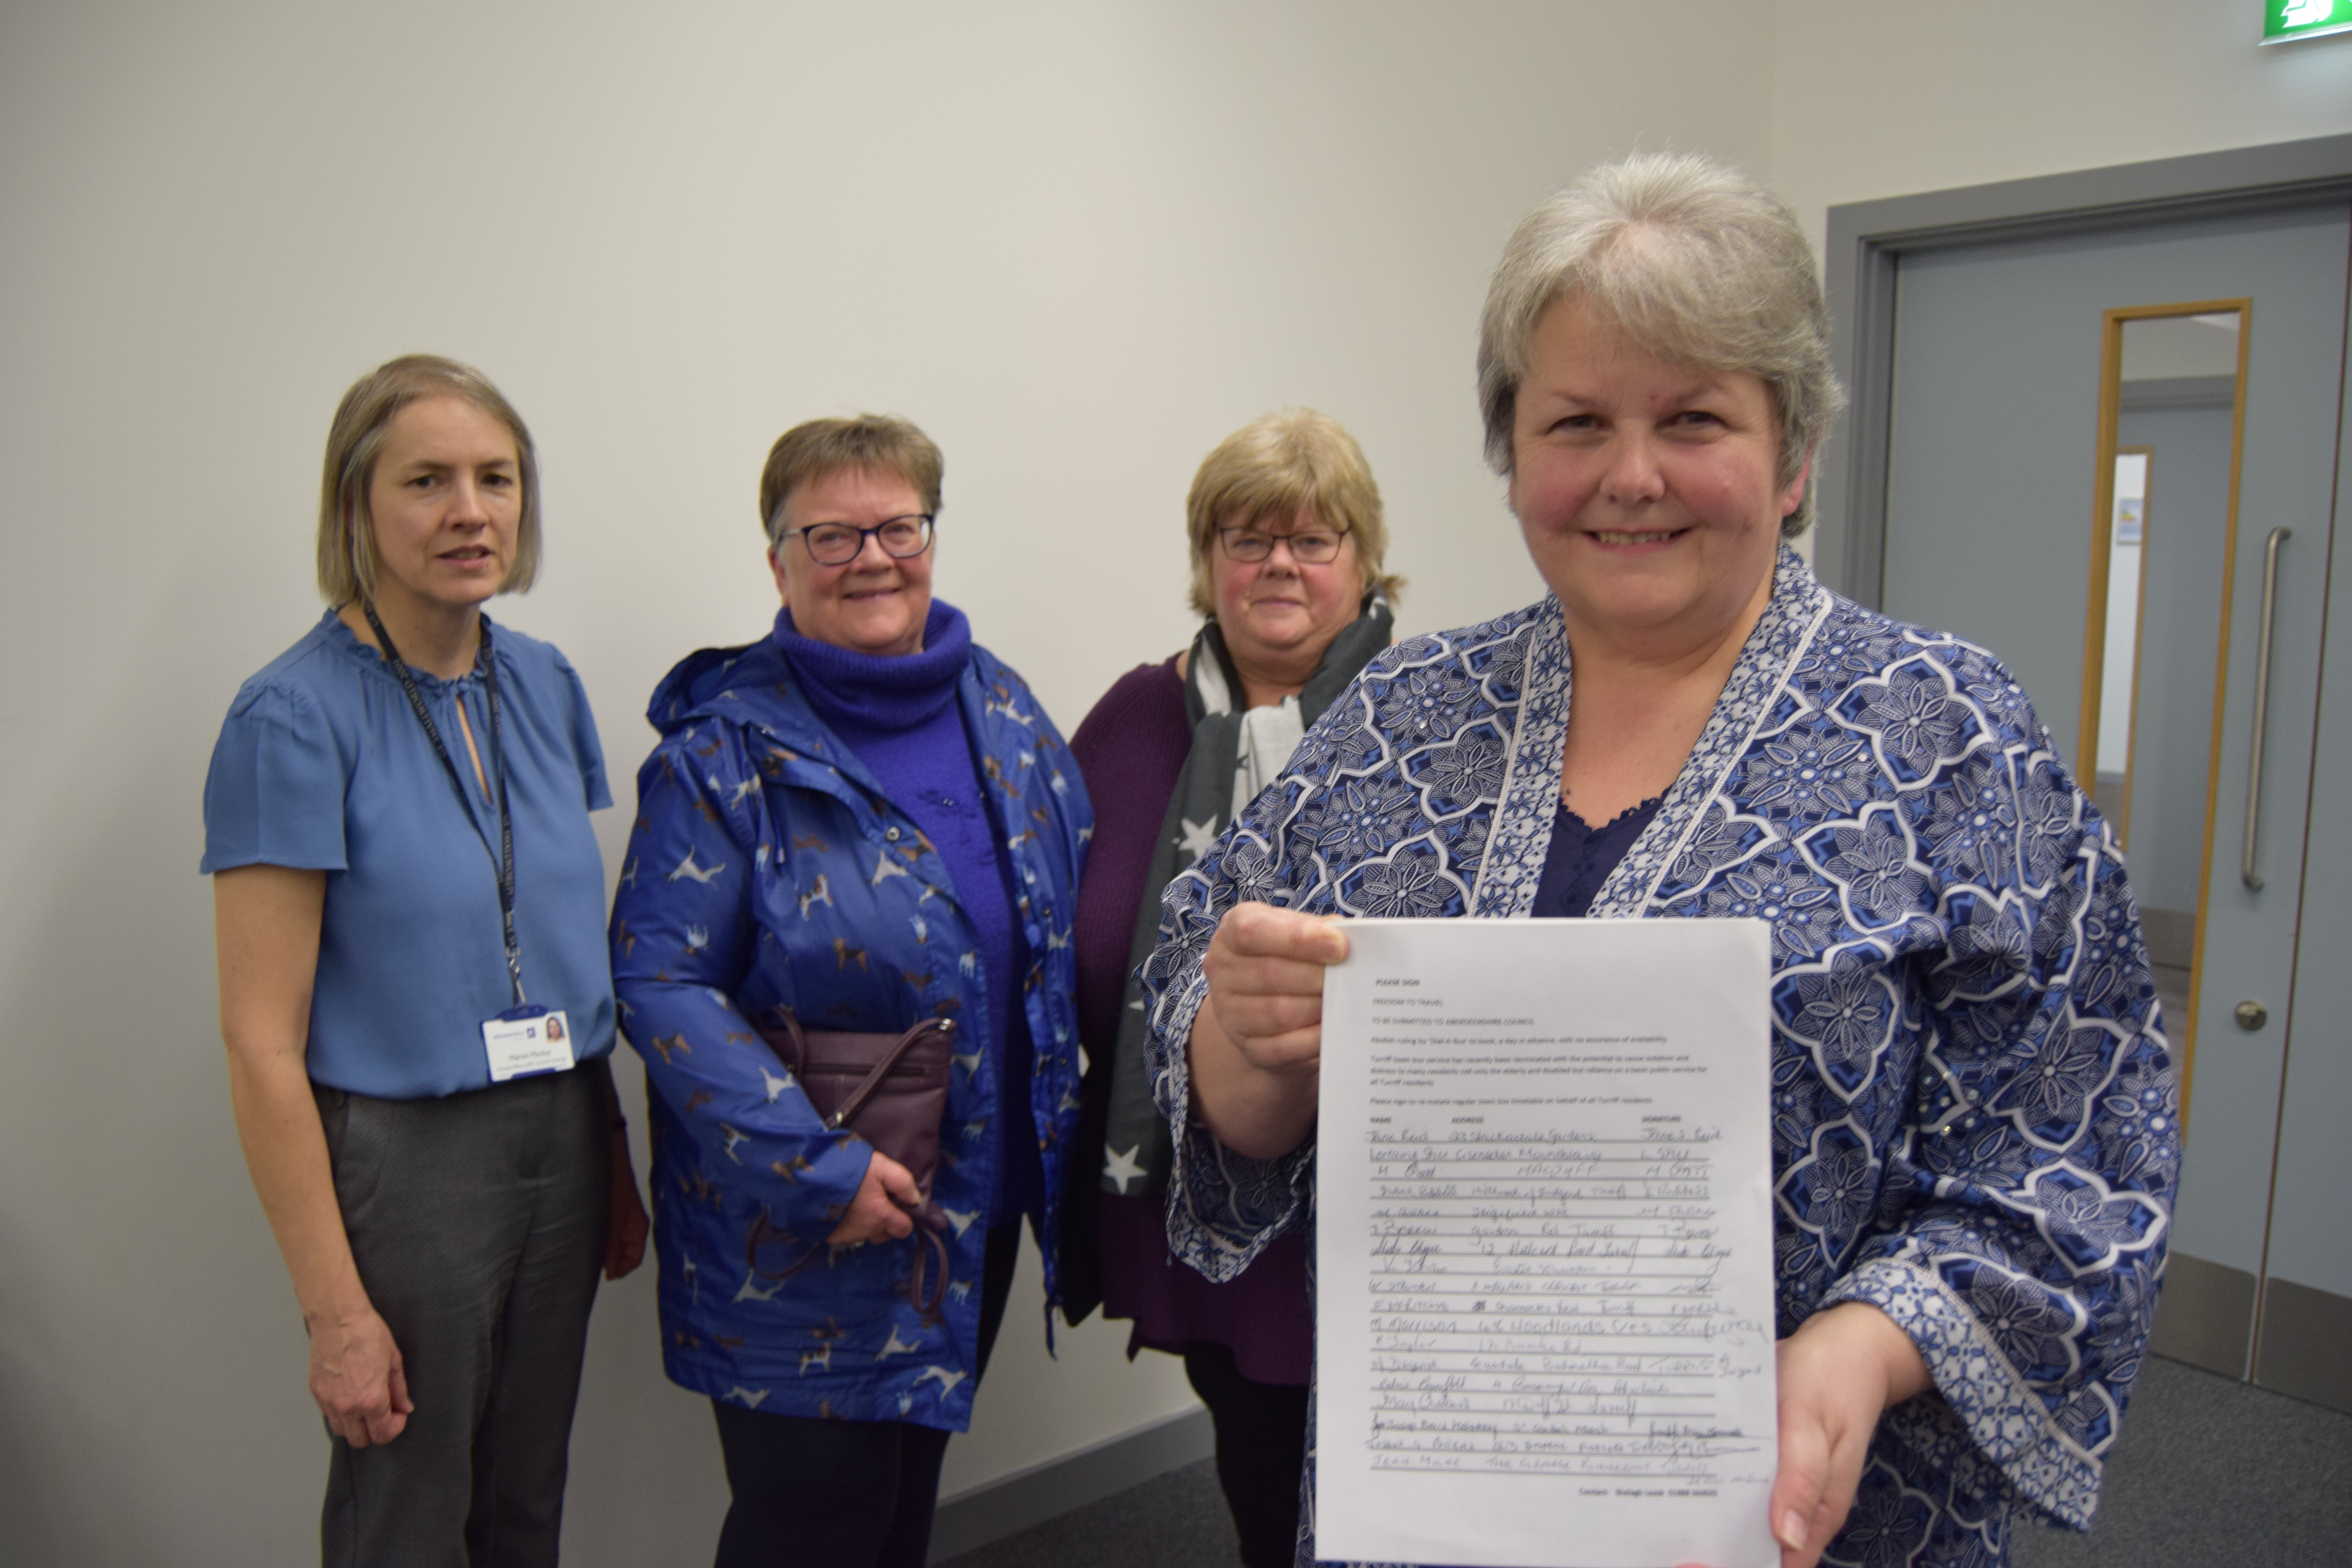 Left to right is council officer Marion Mackay who presented the proposal, local bus user Helen Blanchett, Turriff Business Association chairwoman Marjory Chalmers and councillor Anne Stirling who chaired the meeting and accepted a petition from residents to keep the timetabled bus route